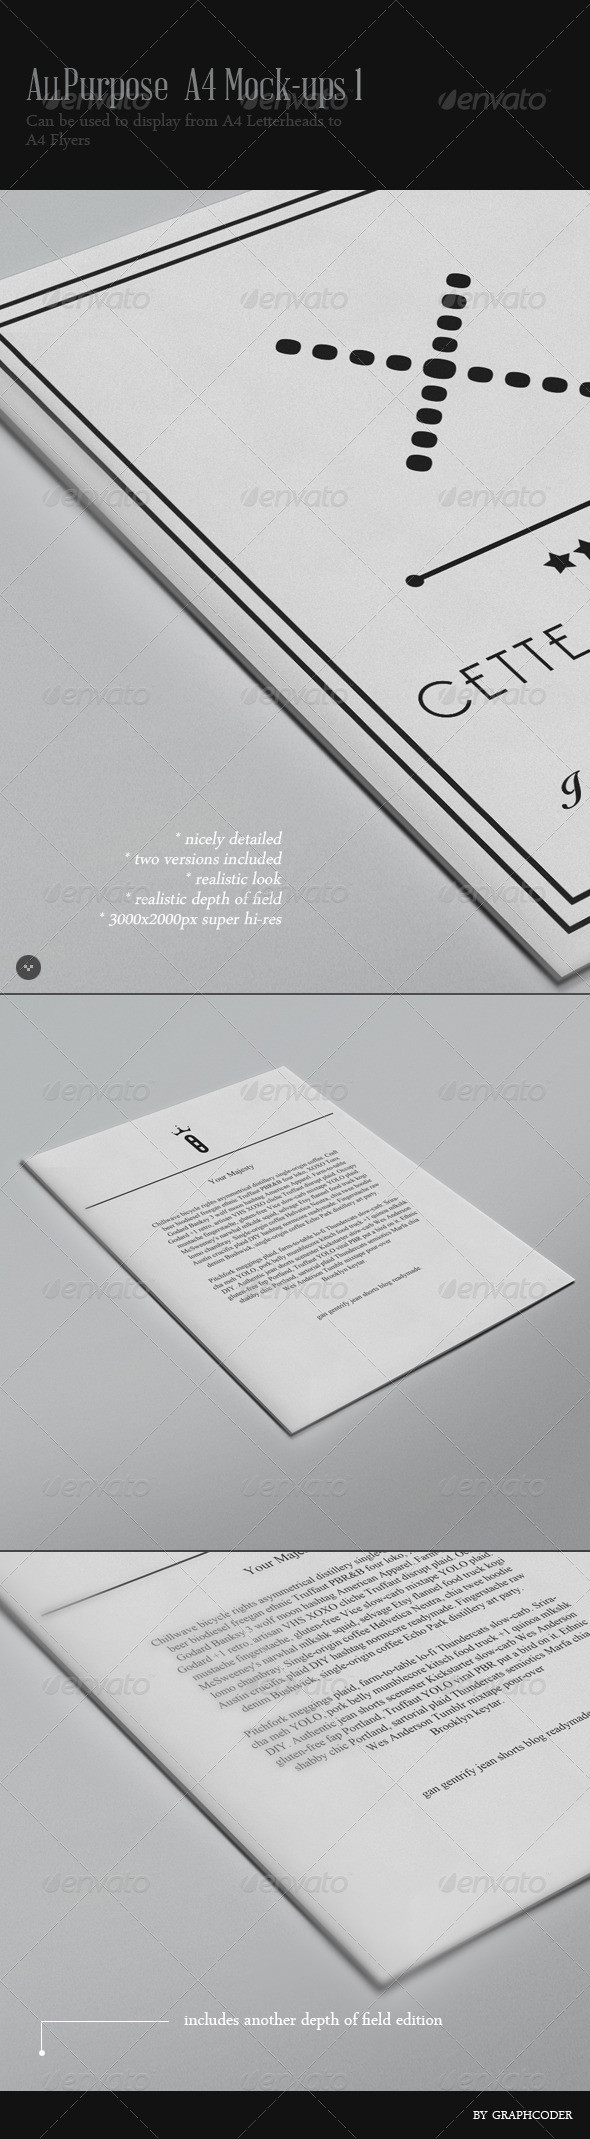 Photo 20realistic 20a4 20mockups 20by 20graphcoder allpurpose 20 20a4 20mock ups 201 preview